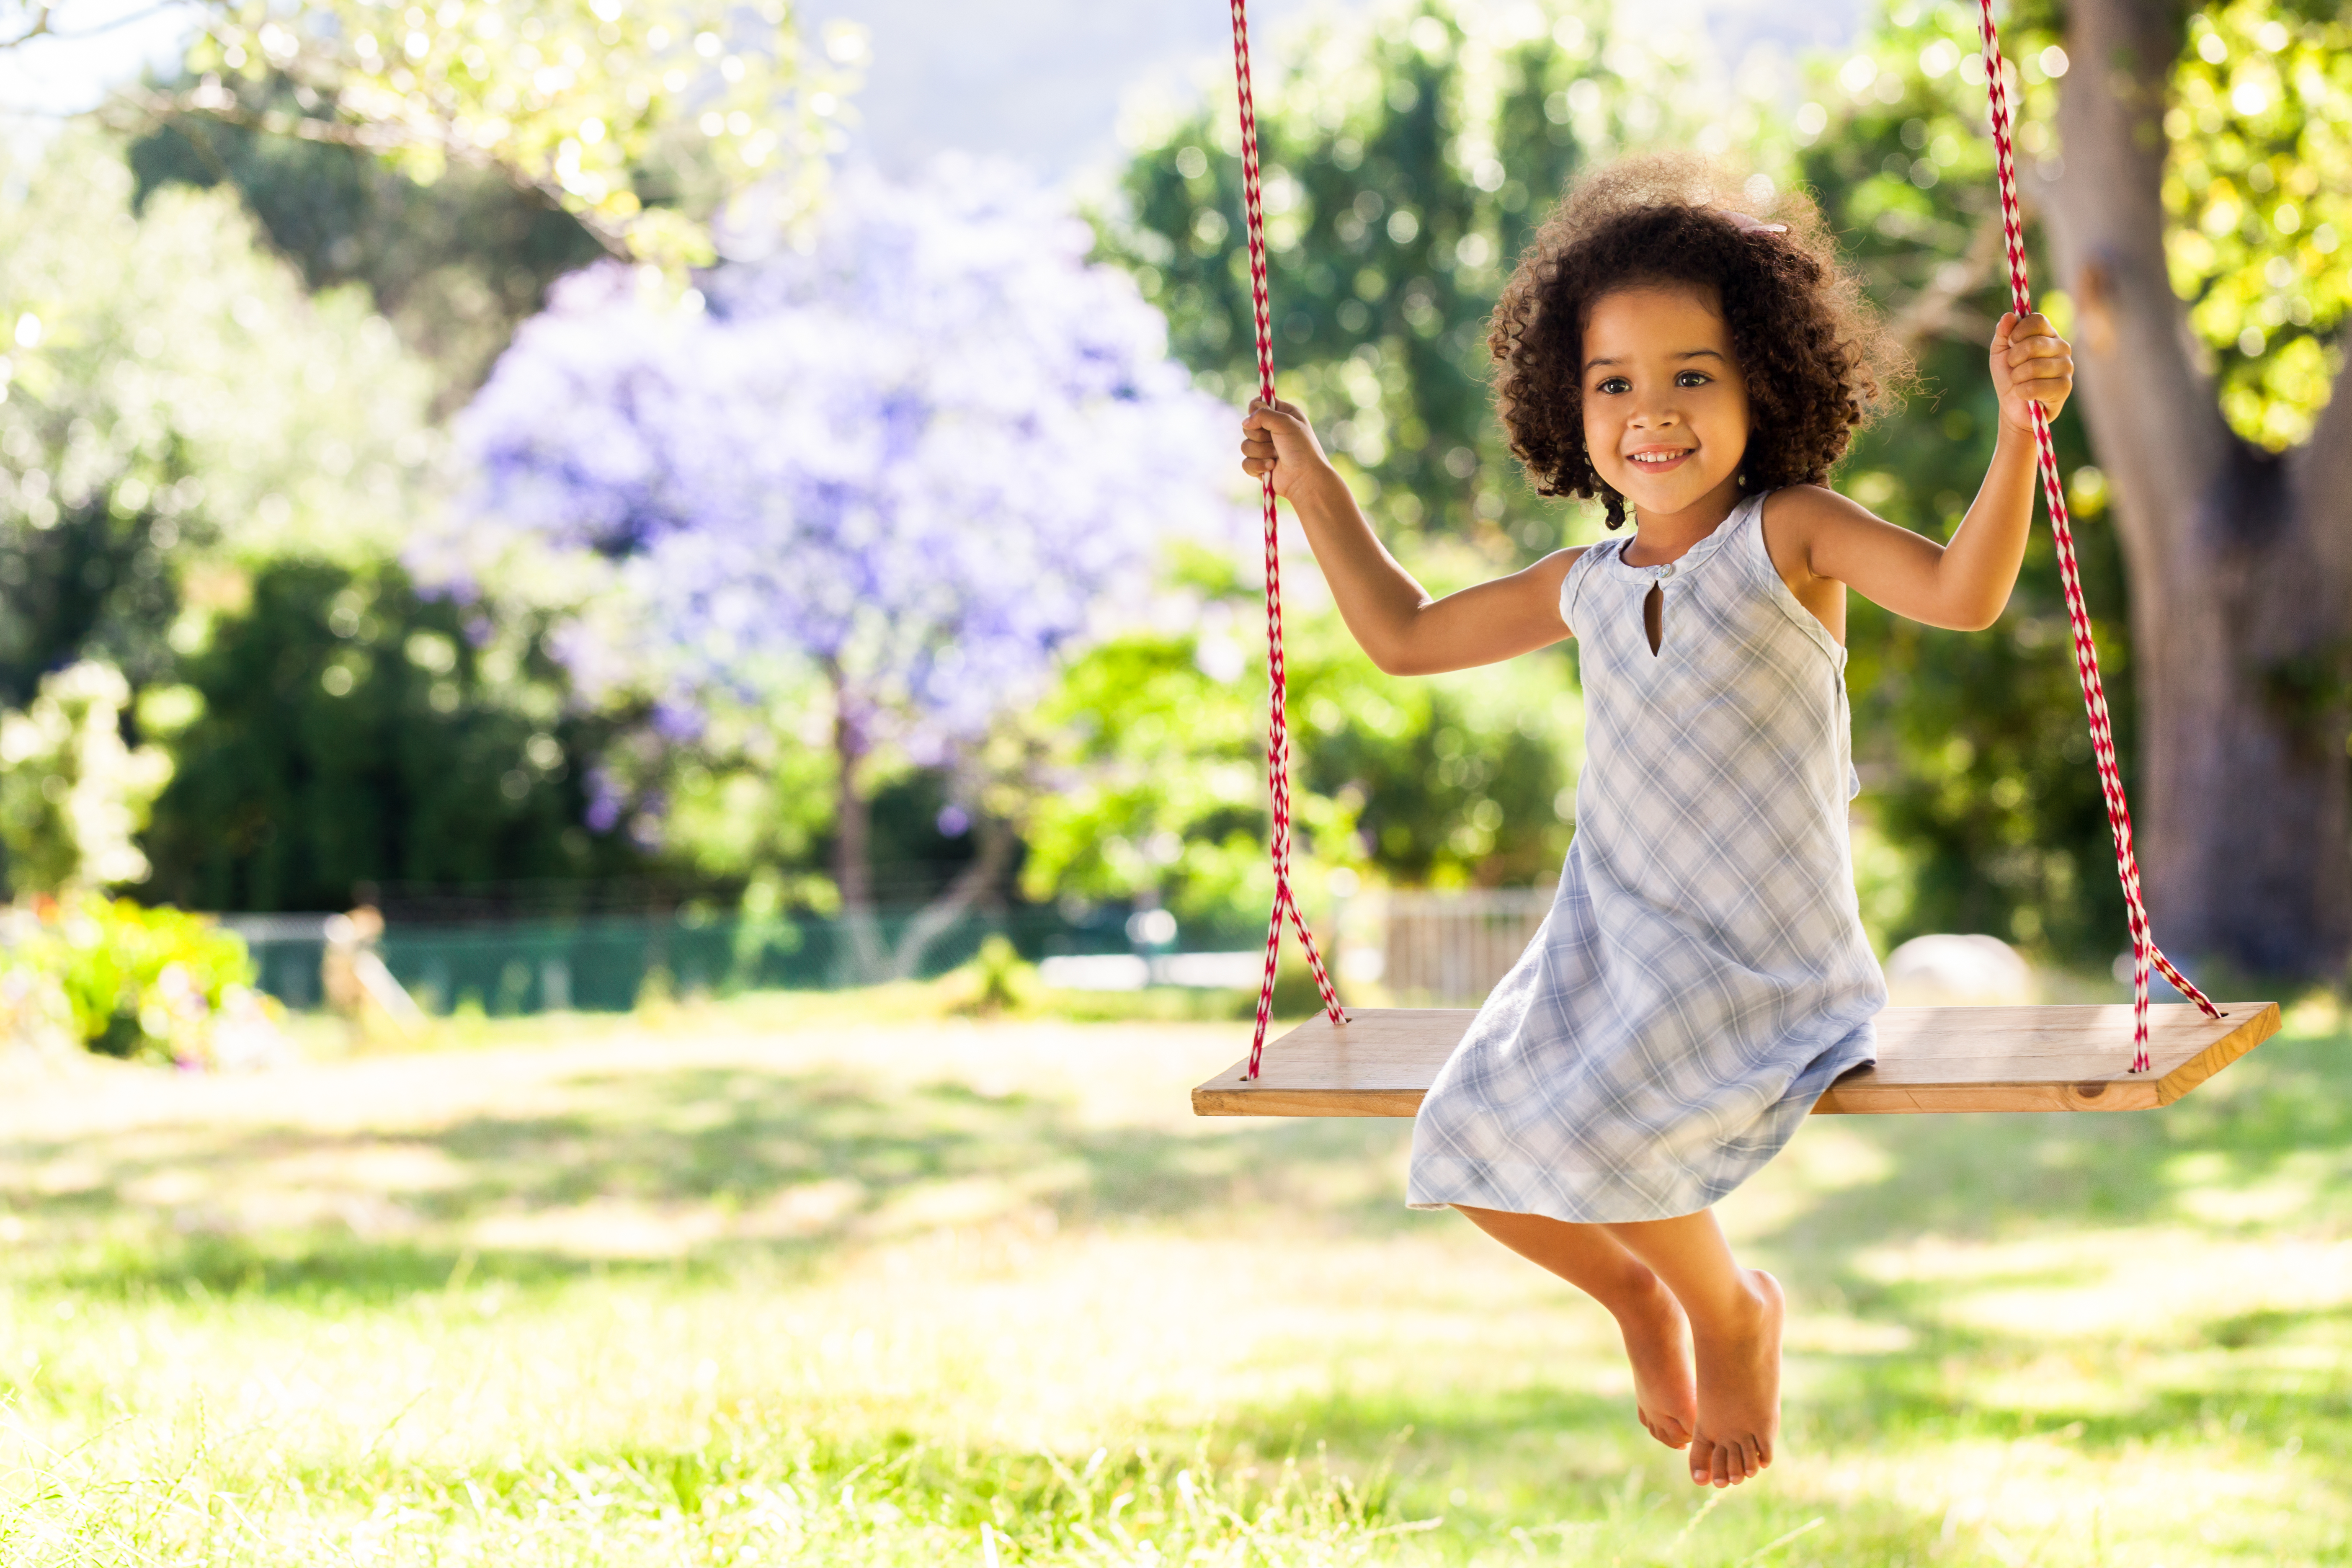 A child sitting on a swing